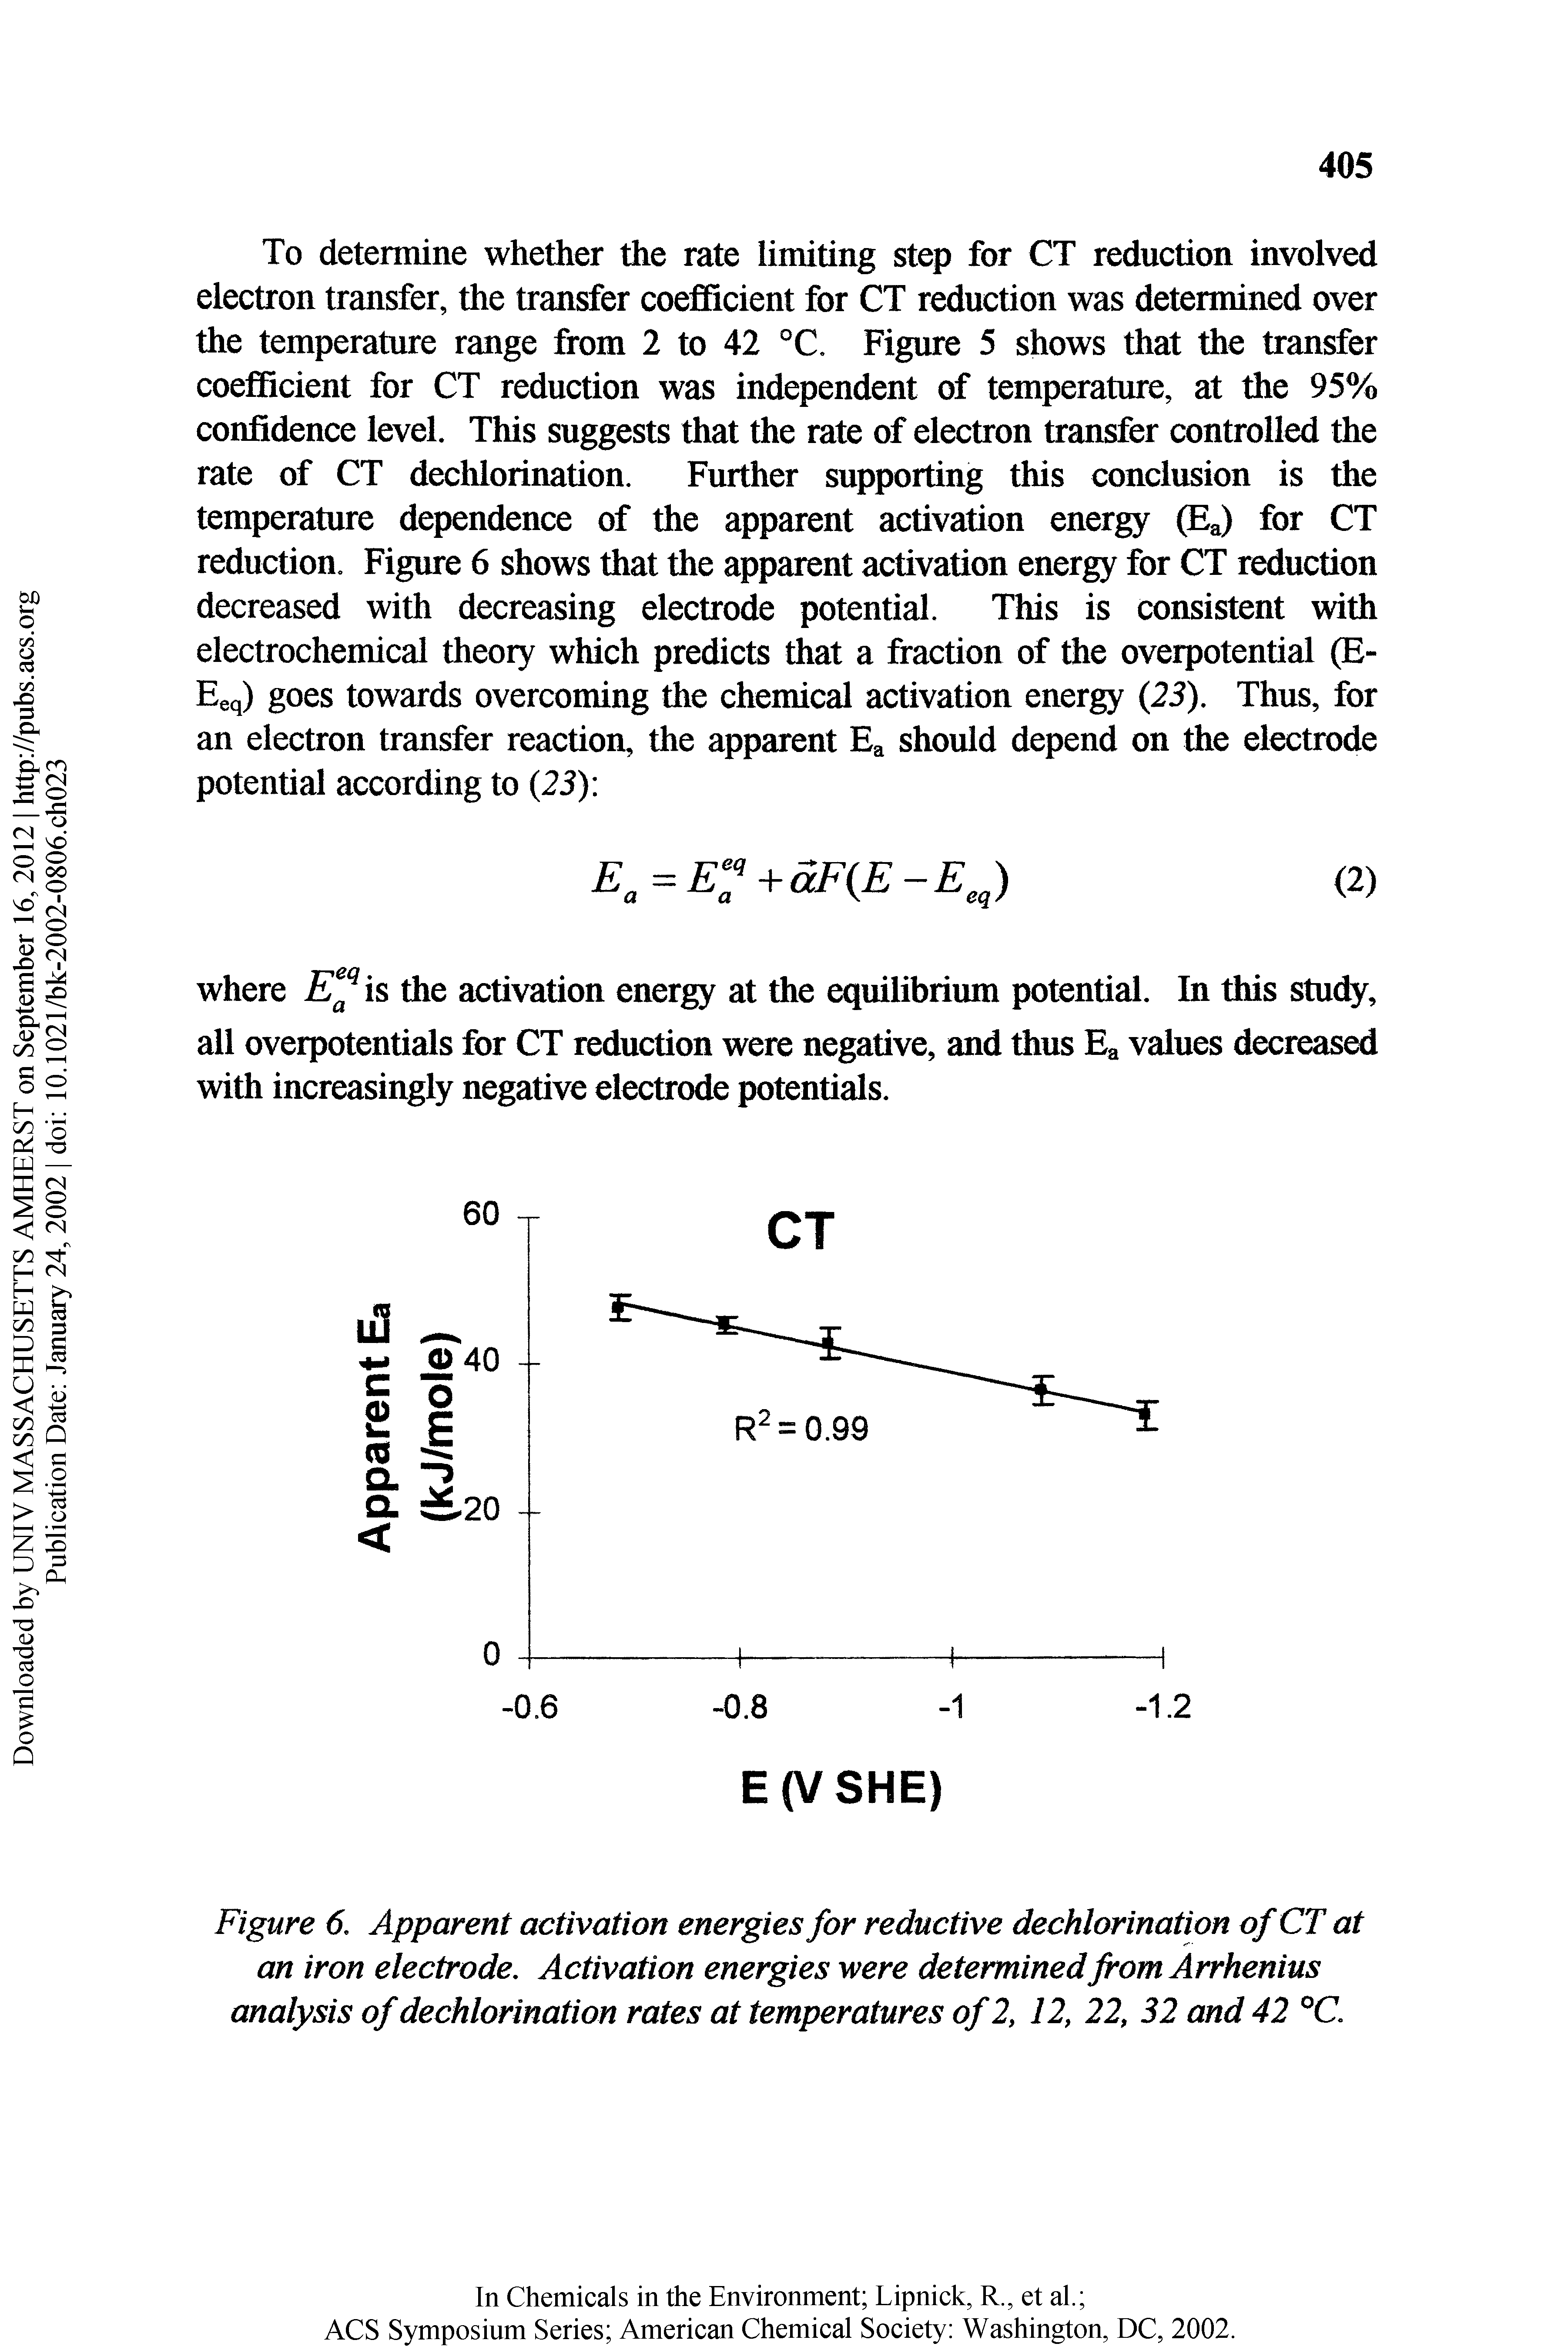 Figure 6, Apparent activation energies for reductive dechlorination of CT at an iron electrode. Activation energies were determined from Arrhenius analysis of dechlorination rates at temperatures of2, 12, 22, 32 and 42...